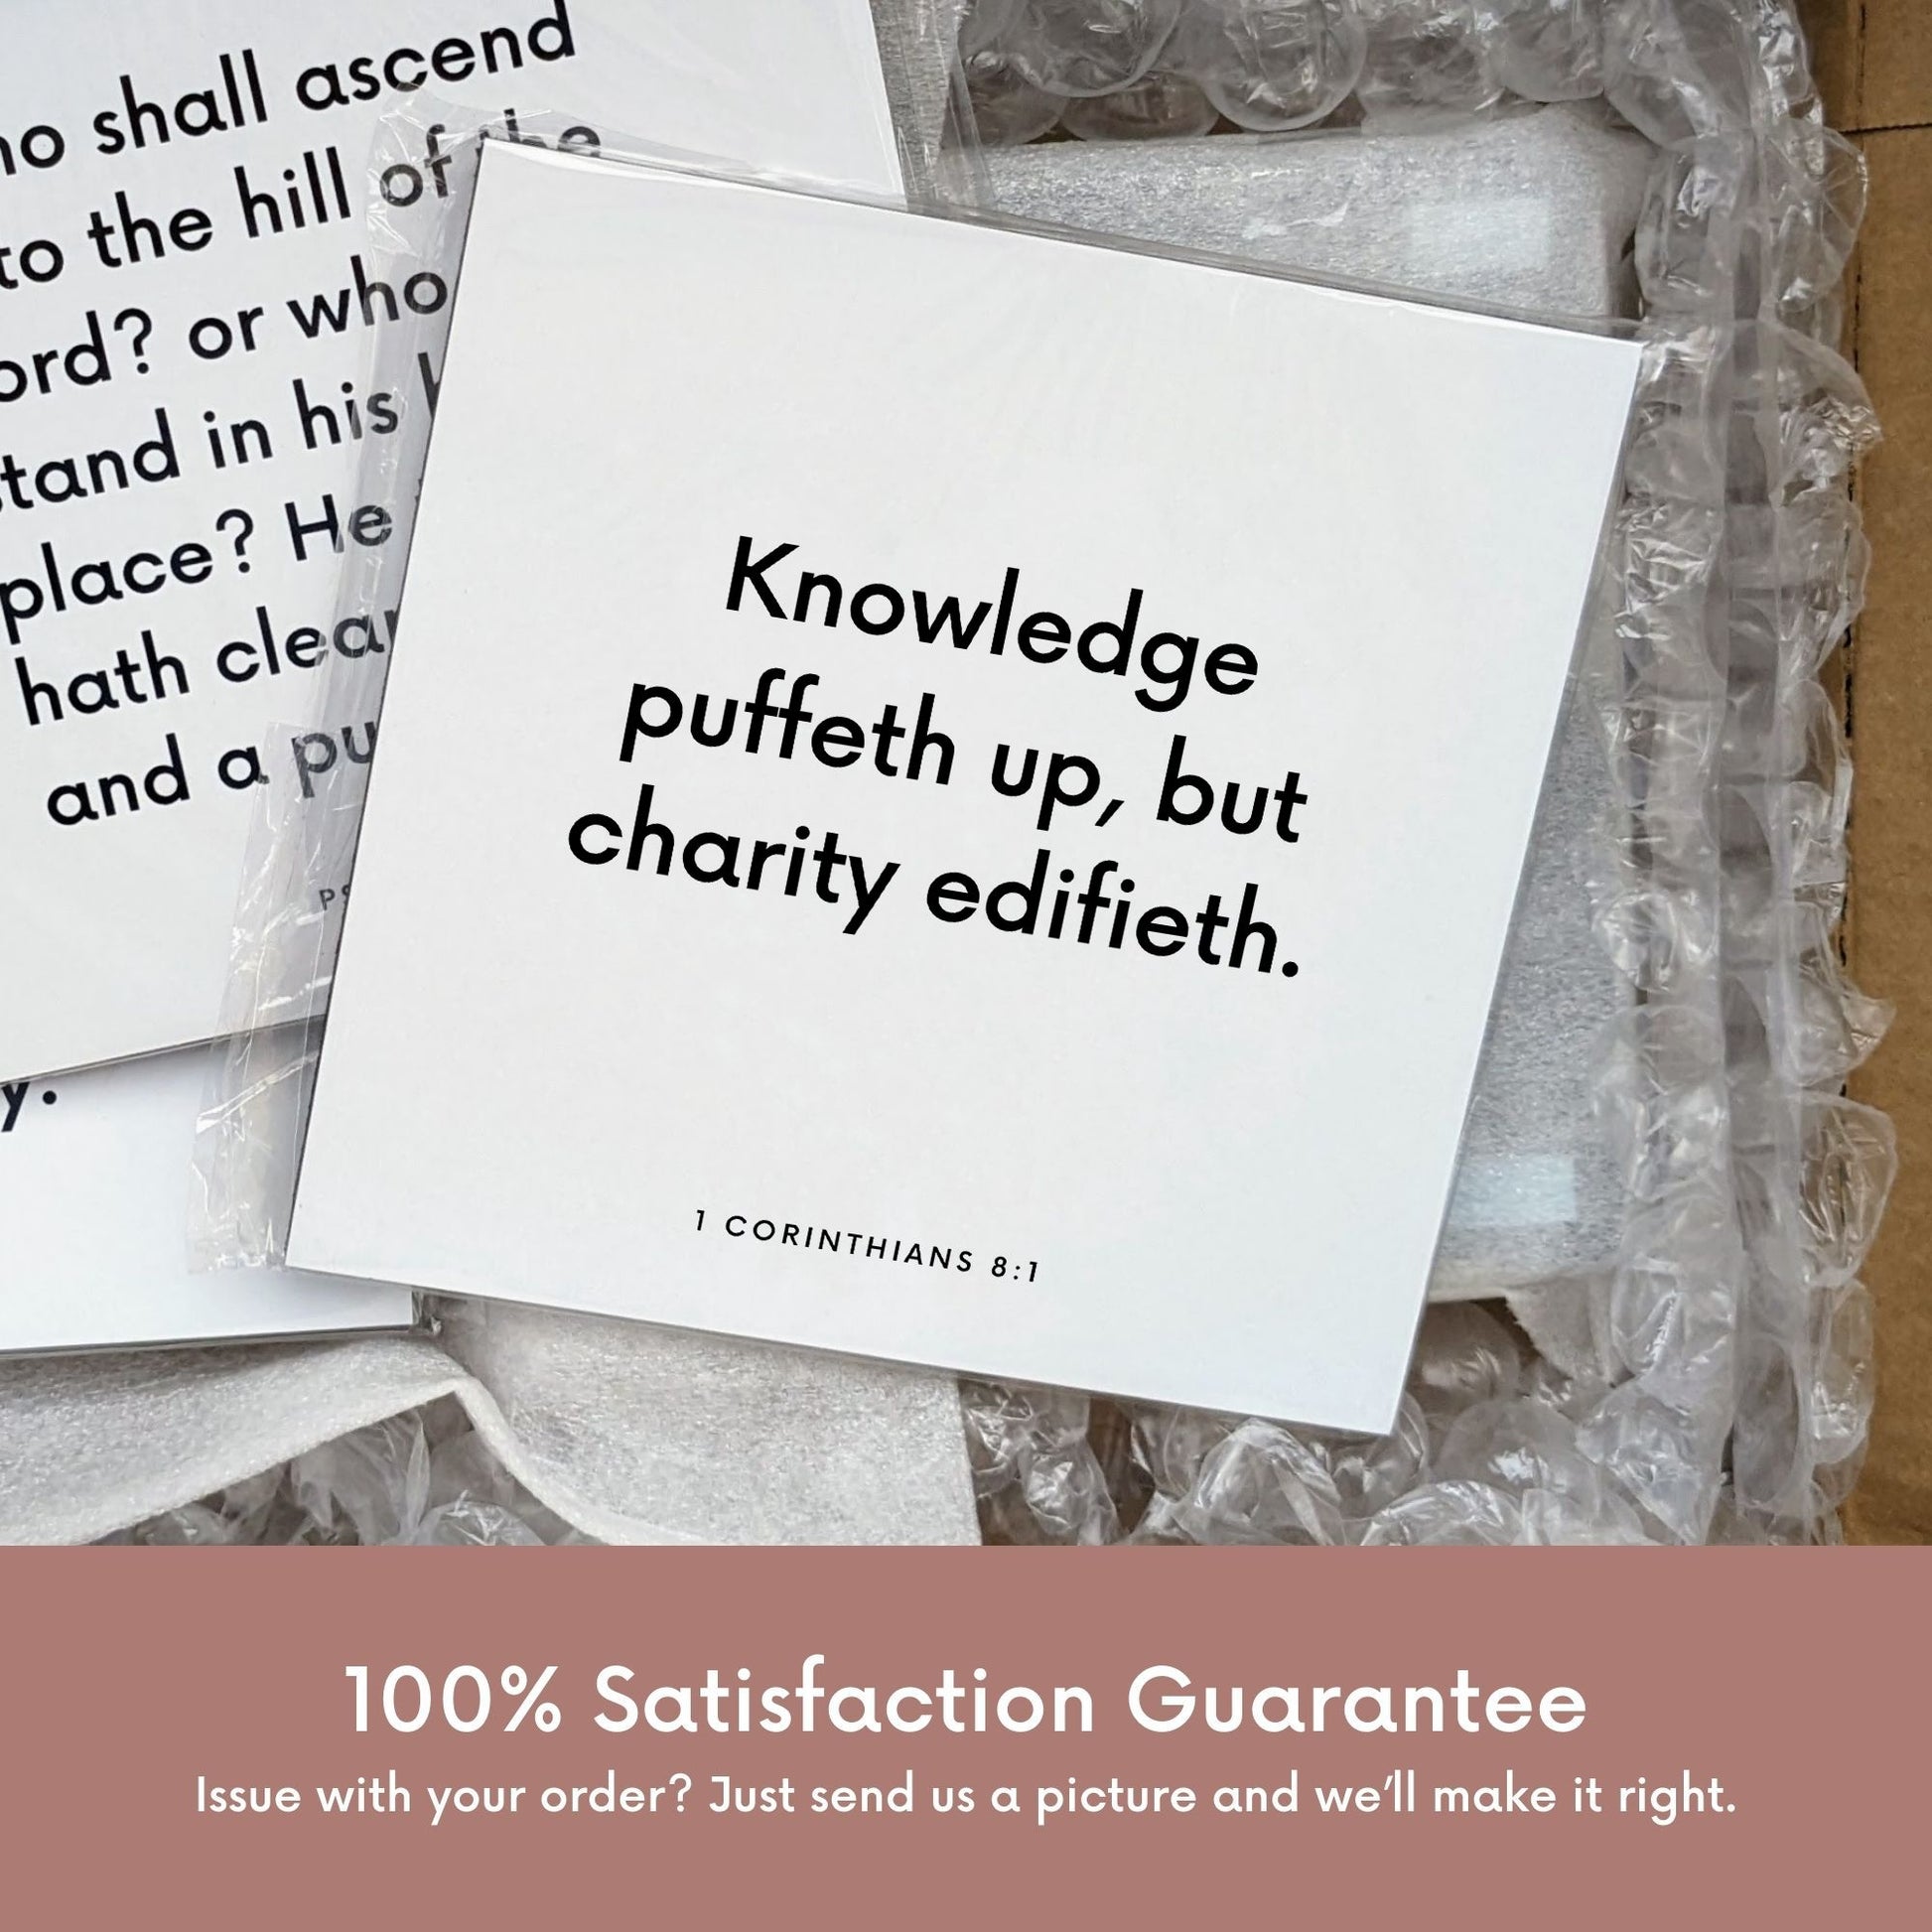 Shipping materials for scripture tile of 1 Corinthians 8:1 - "Knowledge puffeth up, but charity edifieth"